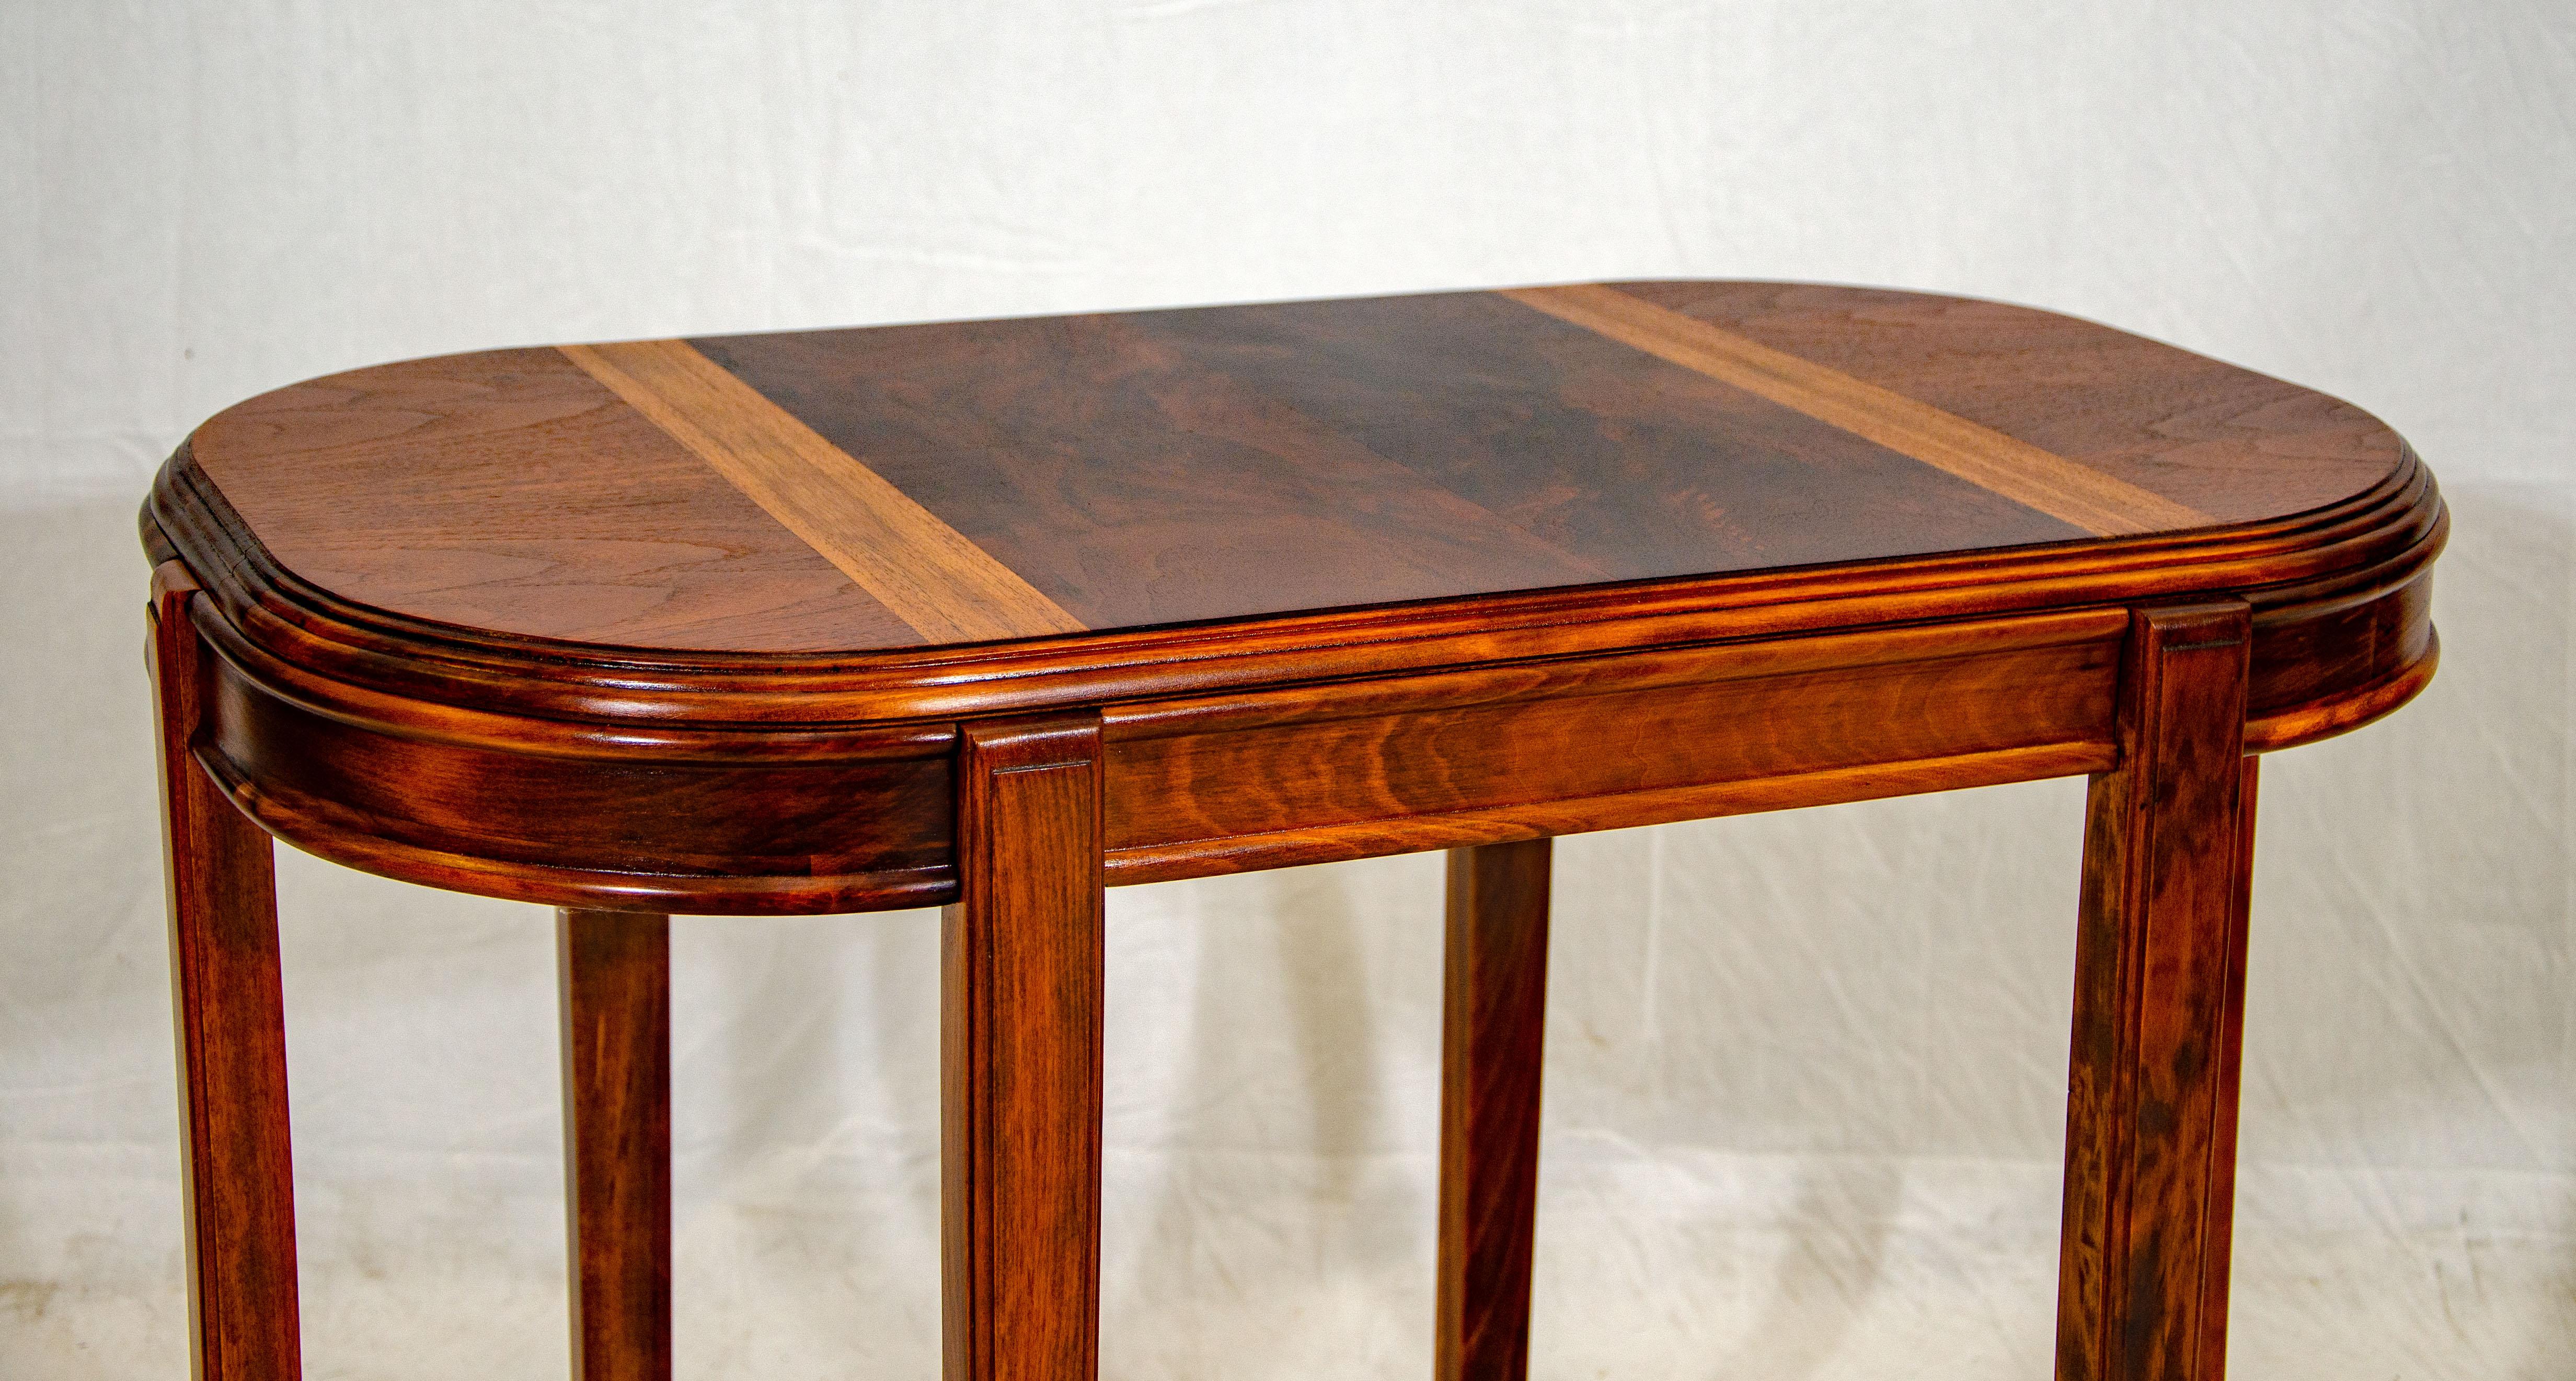 Art Deco Walnut Occasional Table, Center Table In Good Condition For Sale In Crockett, CA